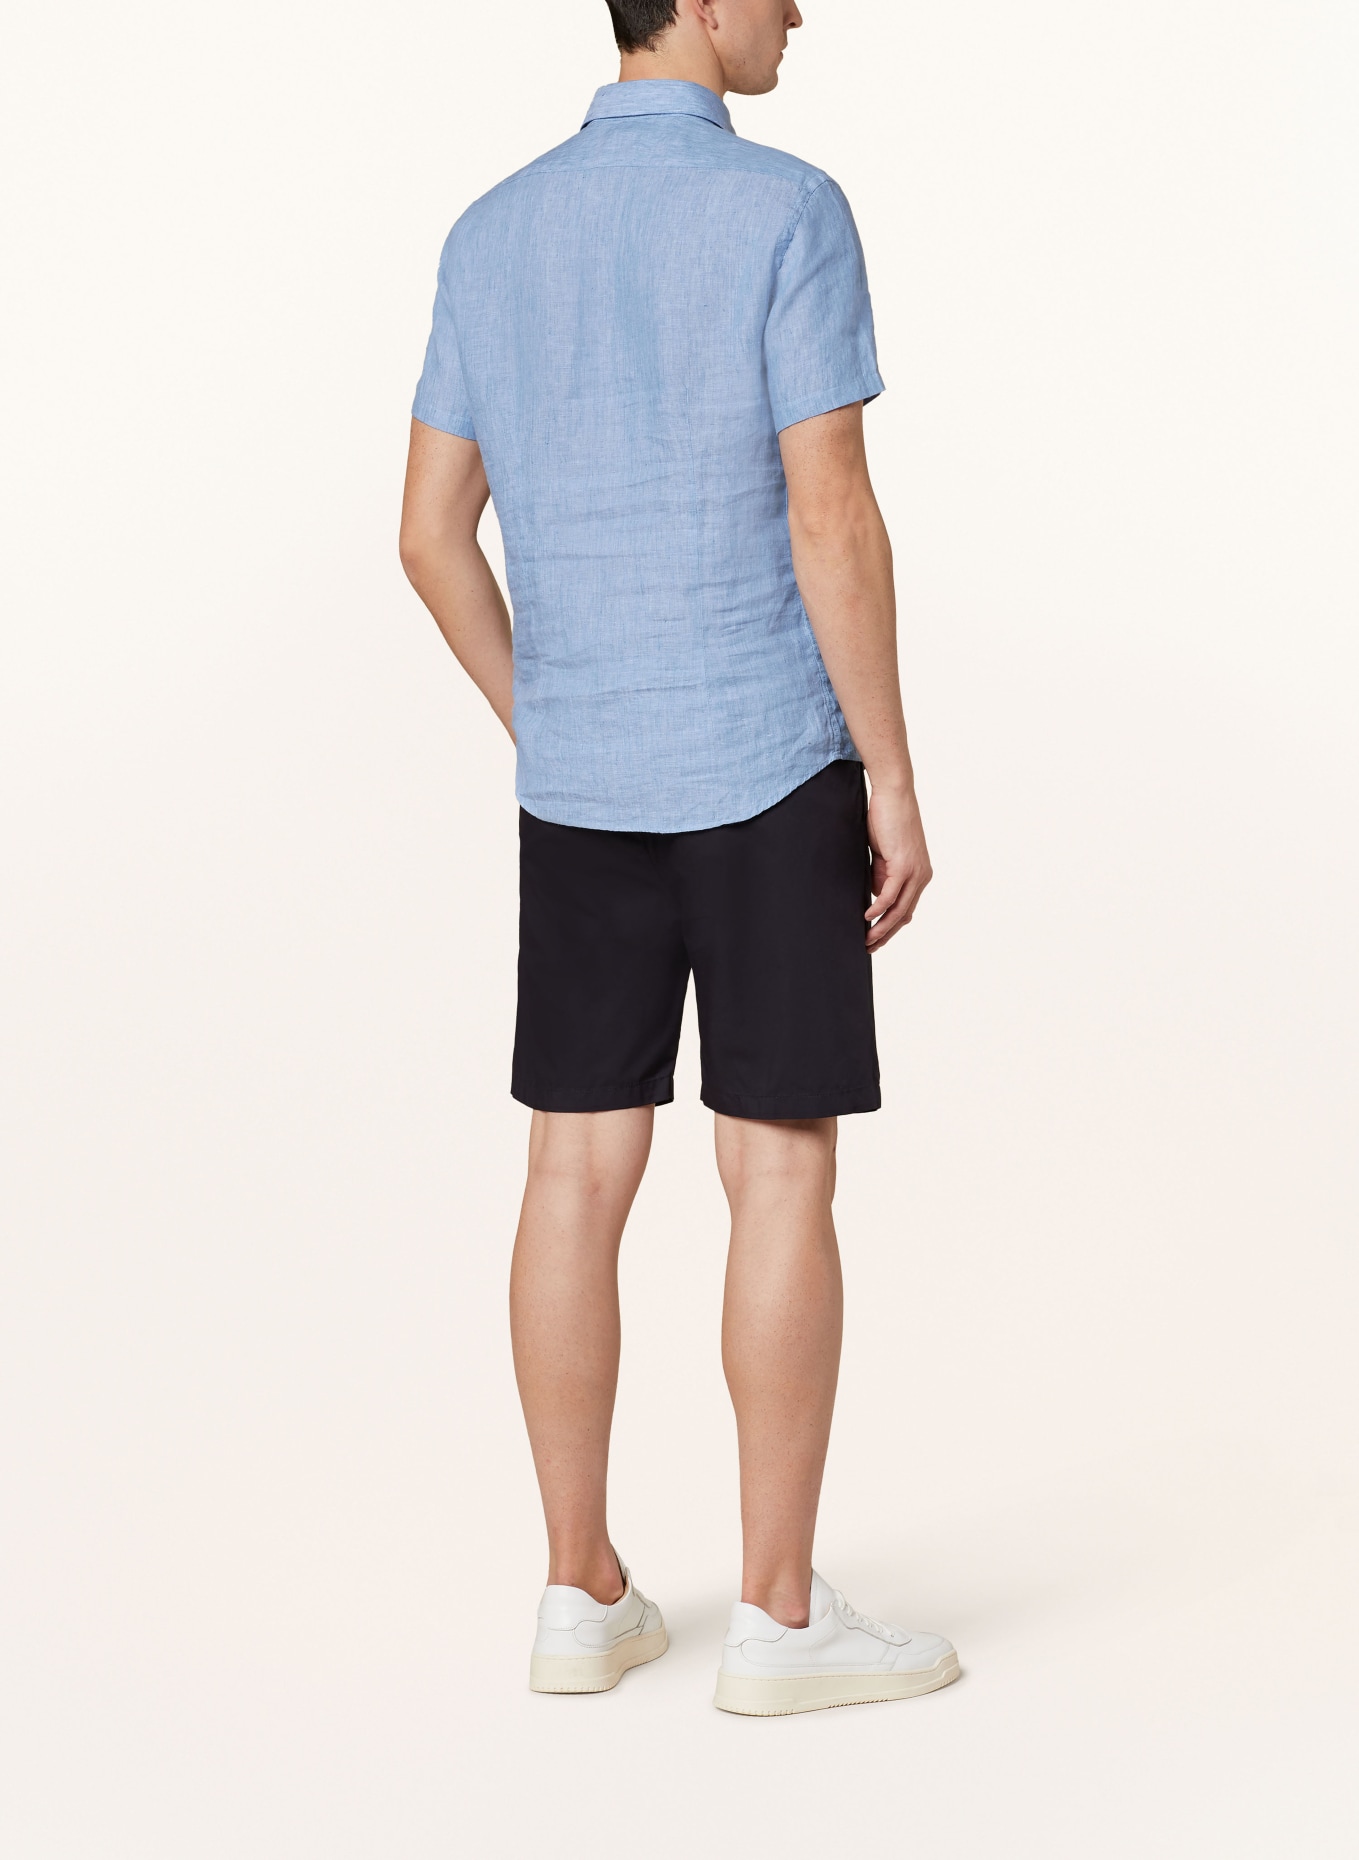 REISS Short sleeve shirt HOLIDAY Slim Fit made of linen, Color: LIGHT BLUE (Image 3)